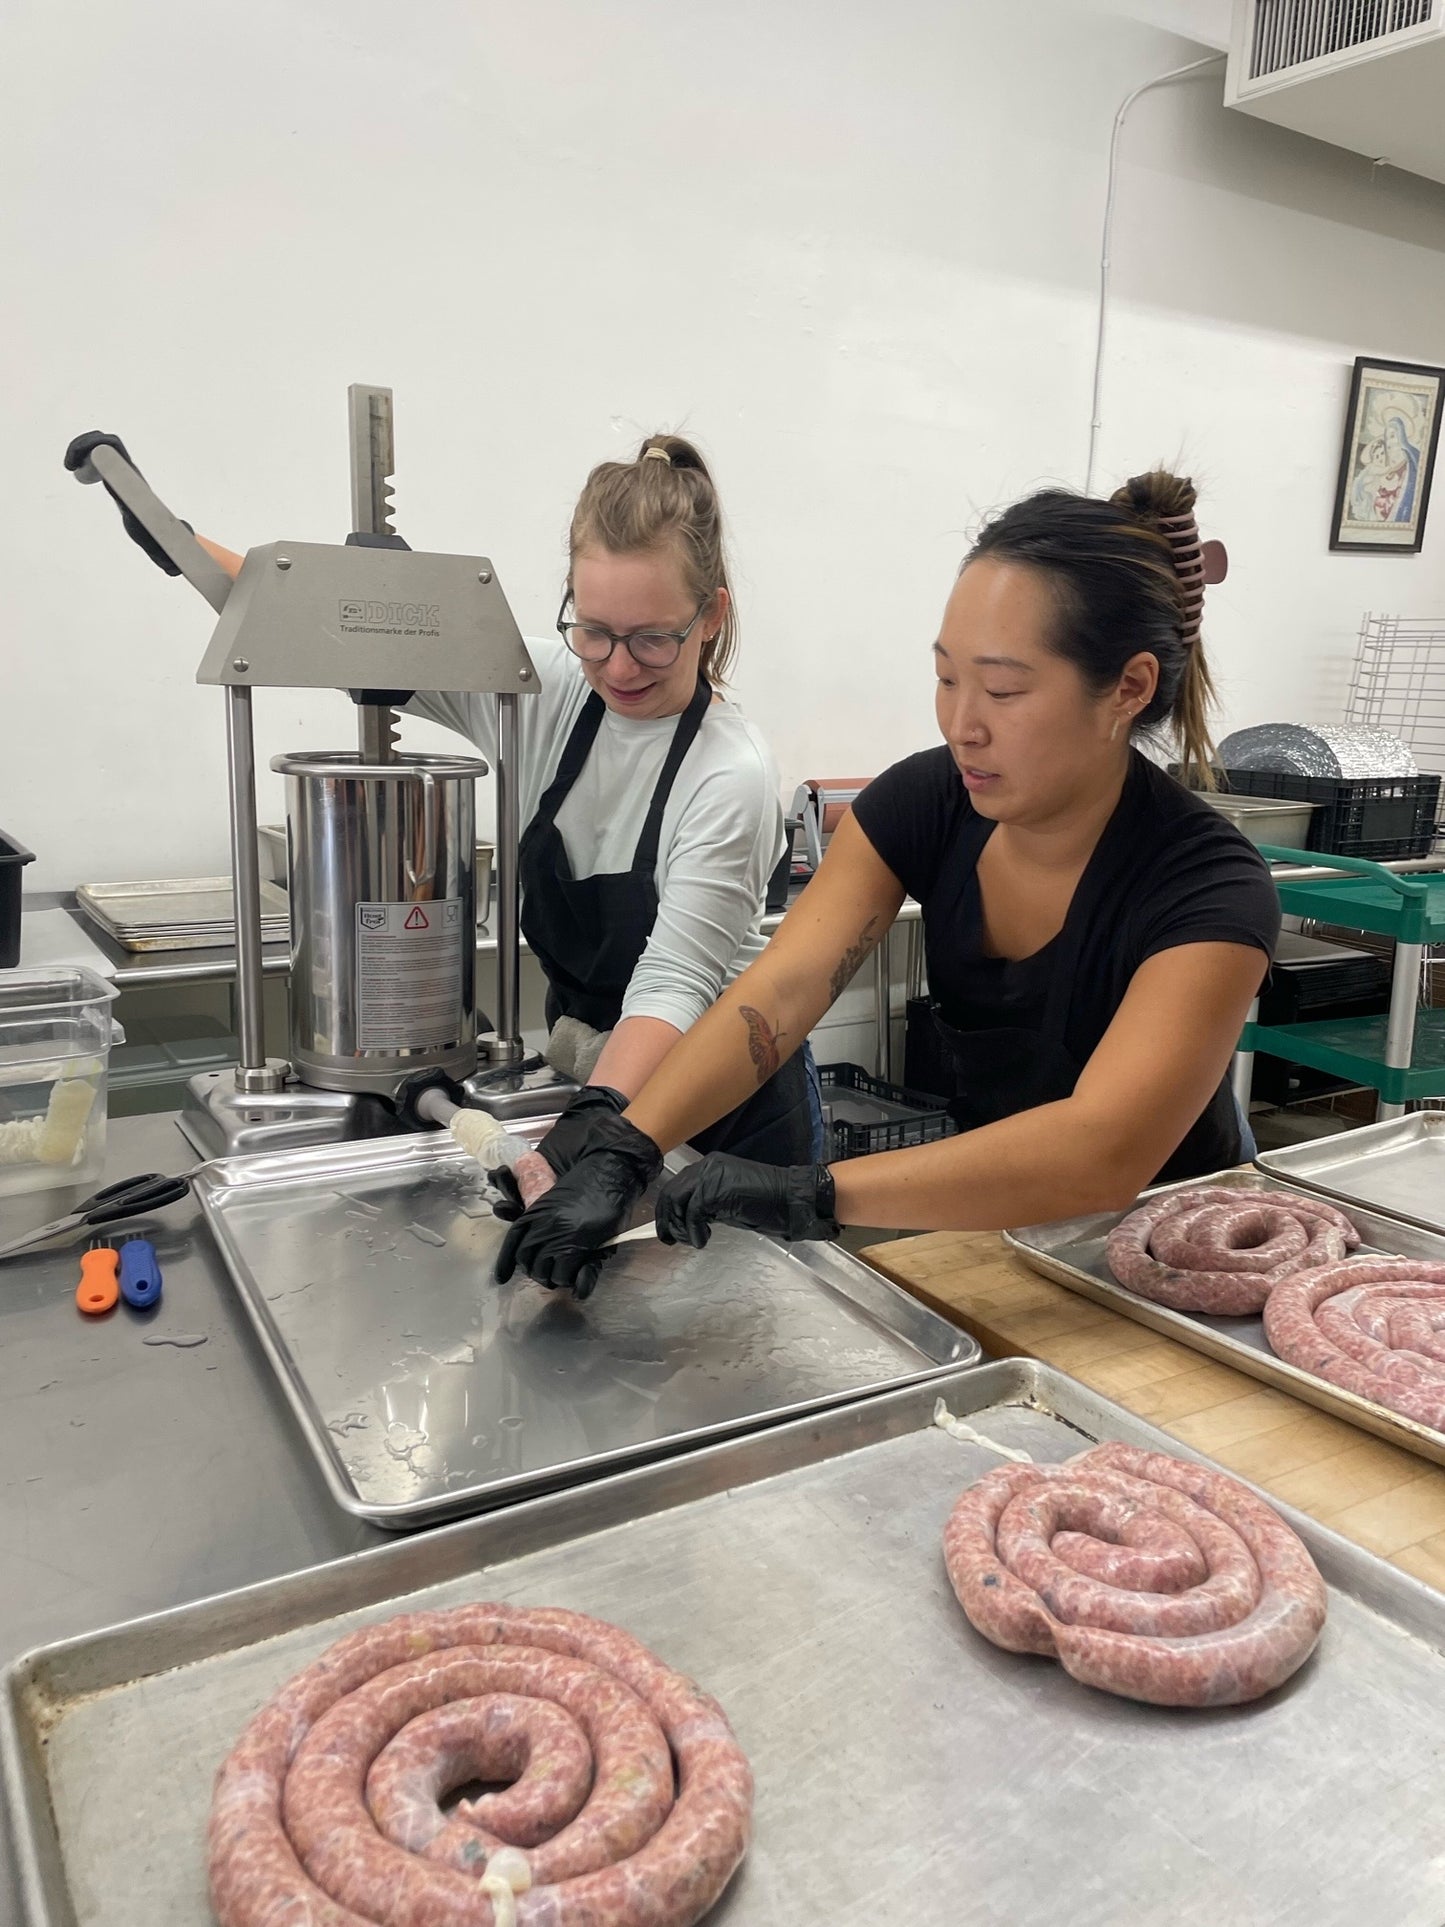 Sausage Making Class February 3rd